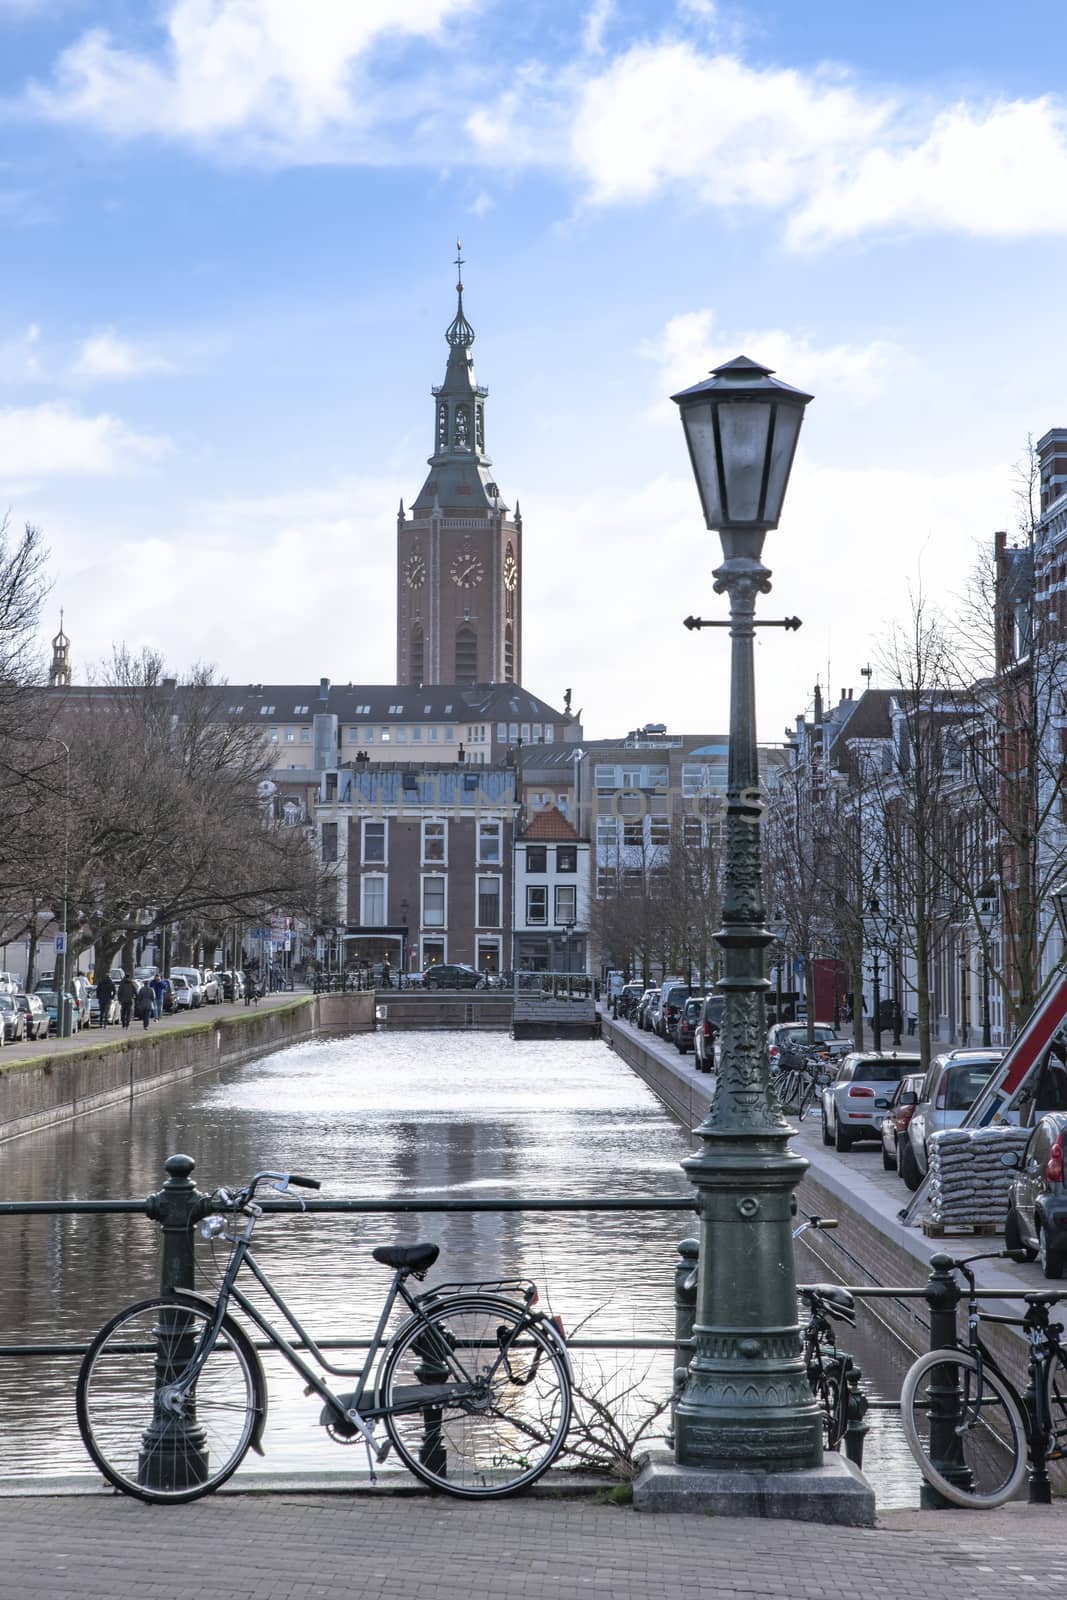 Typical and iconic Dutch canal view on the St Jacob church or Grote Kerk in Dutch in The Hague, Netherlands